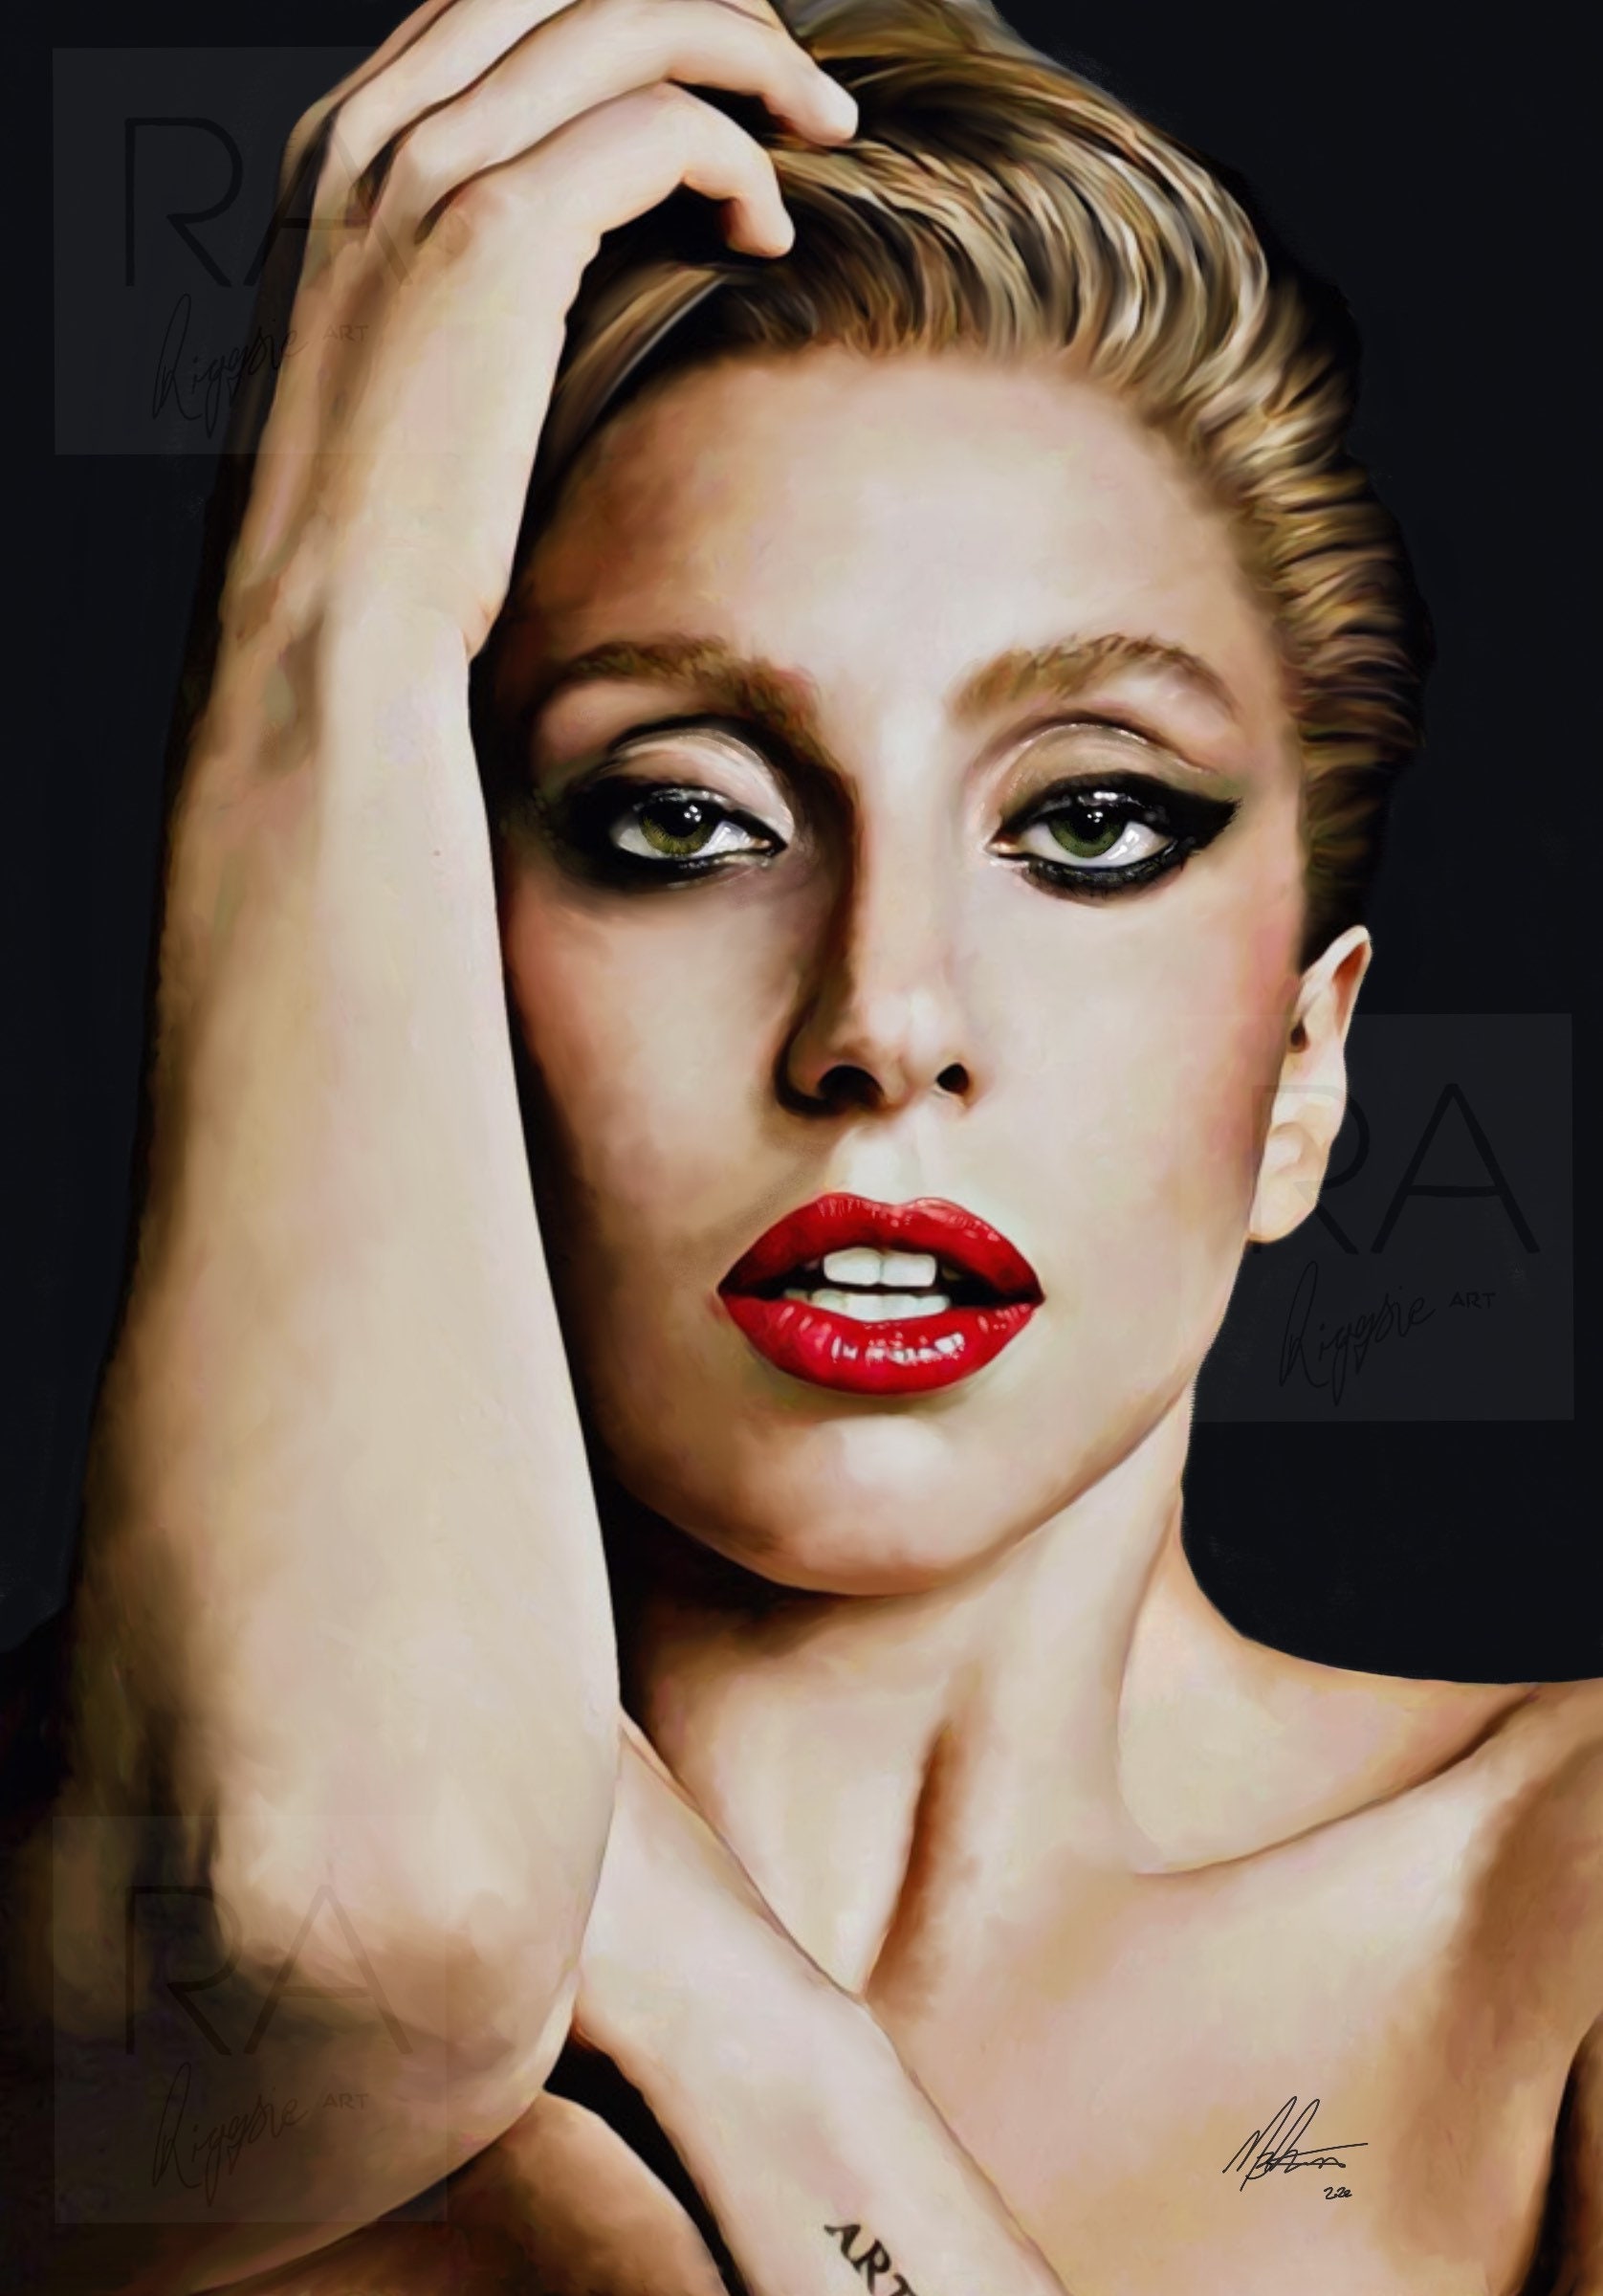 Lady Gaga singer Decorative Painting 24x36 Canvas Poster Wall Art Living  Room Posters Bedroom Painting